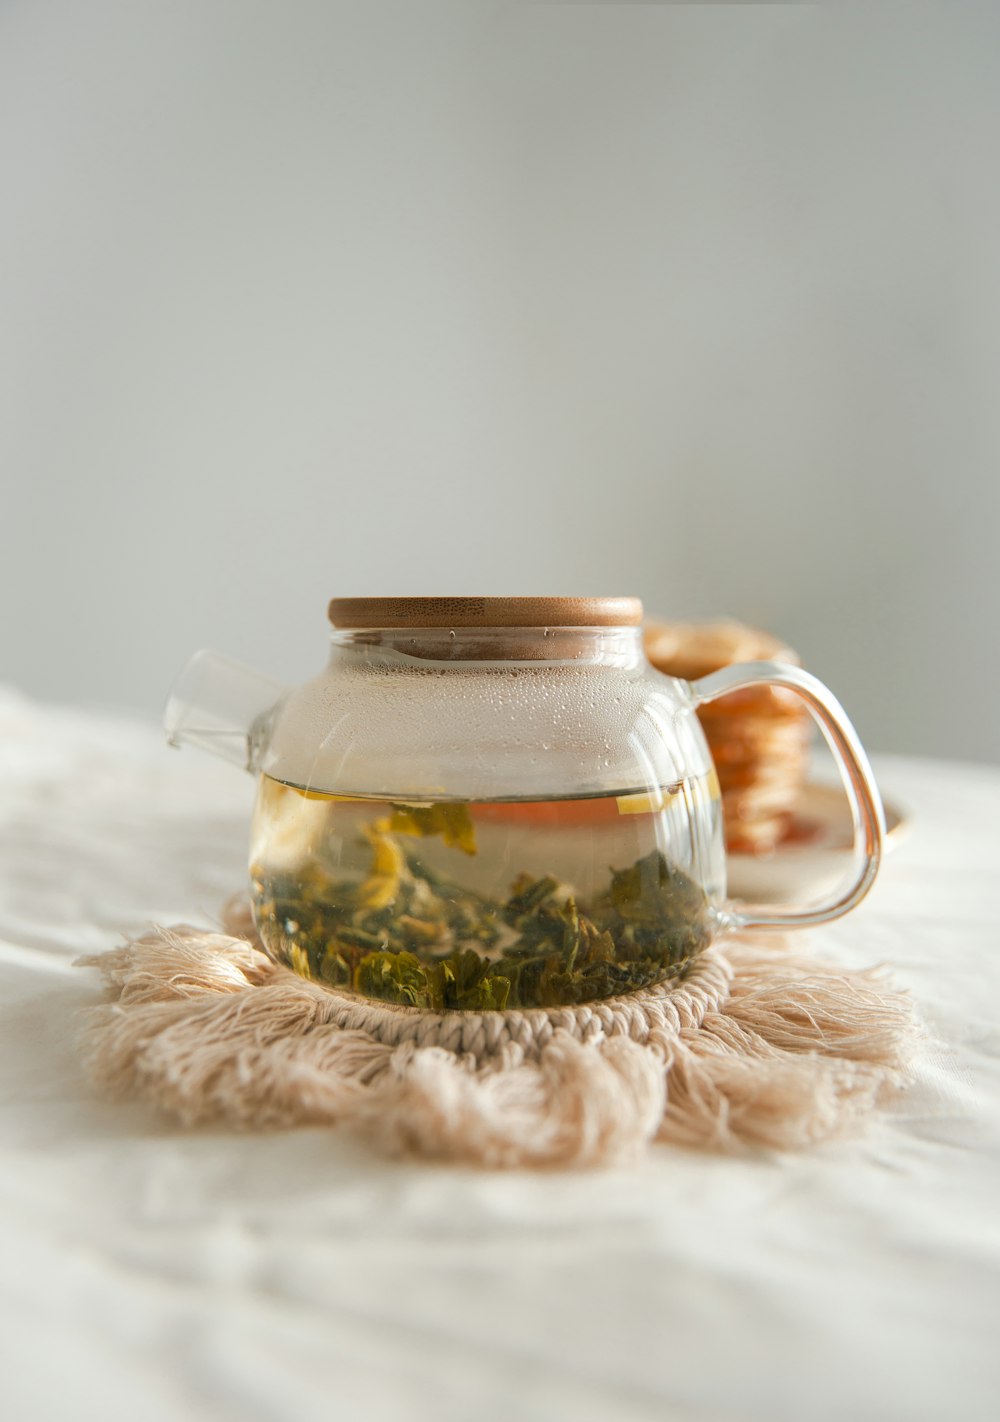 clear glass jar on white textile